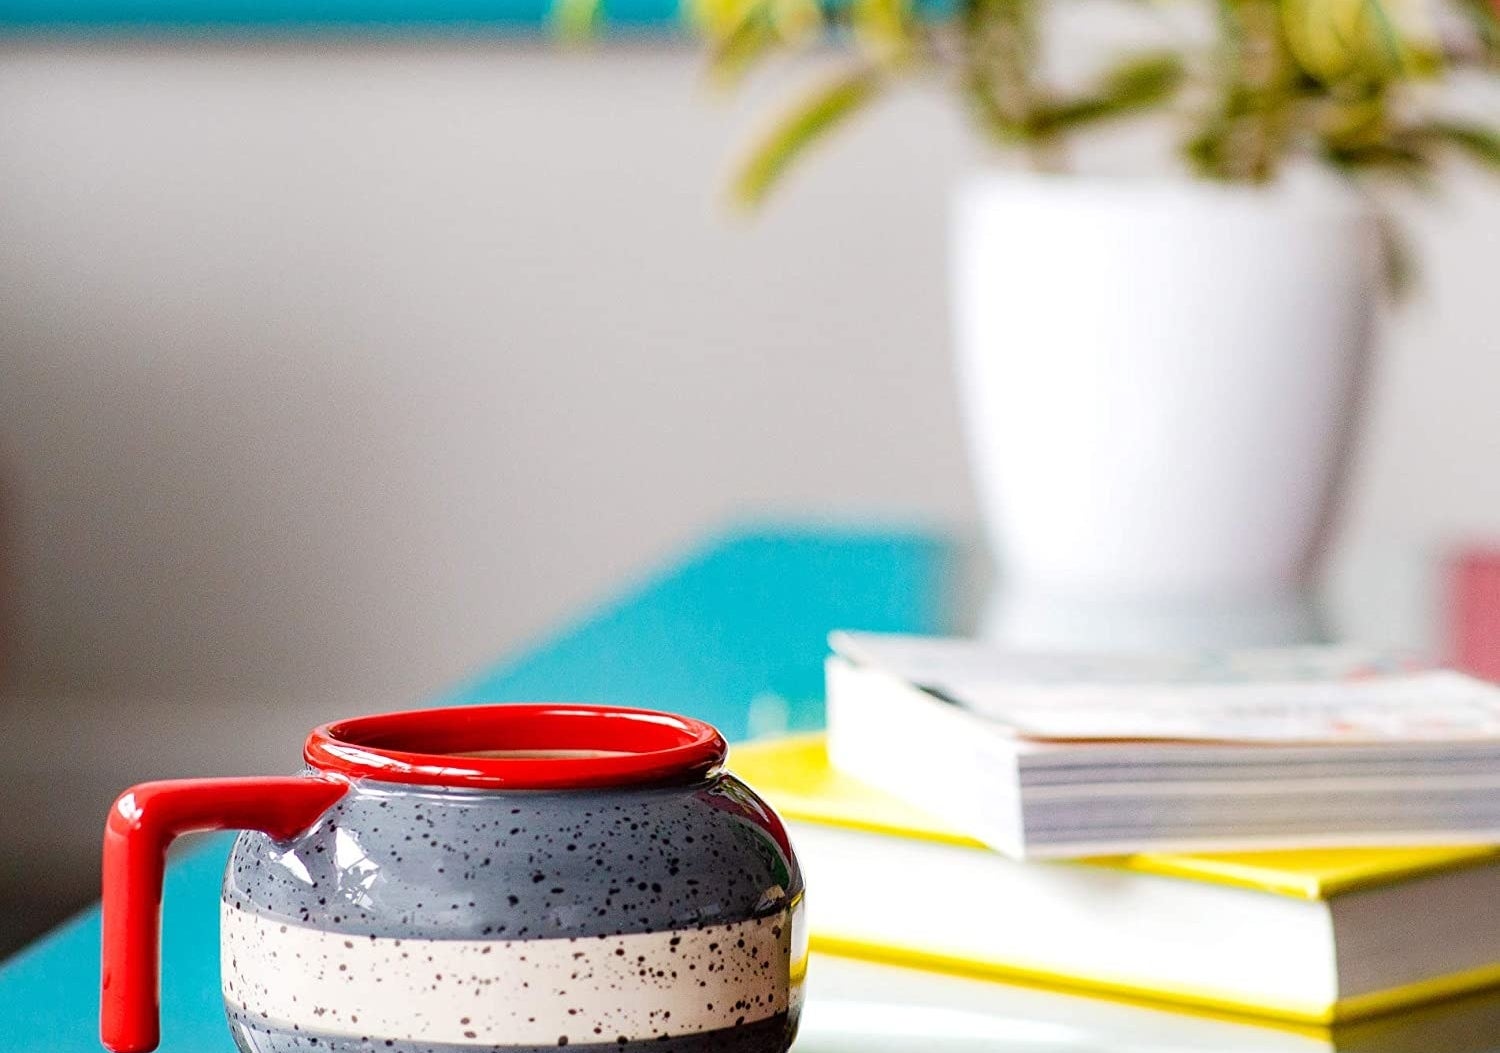 A mug in the shape of a curling rock on a side table